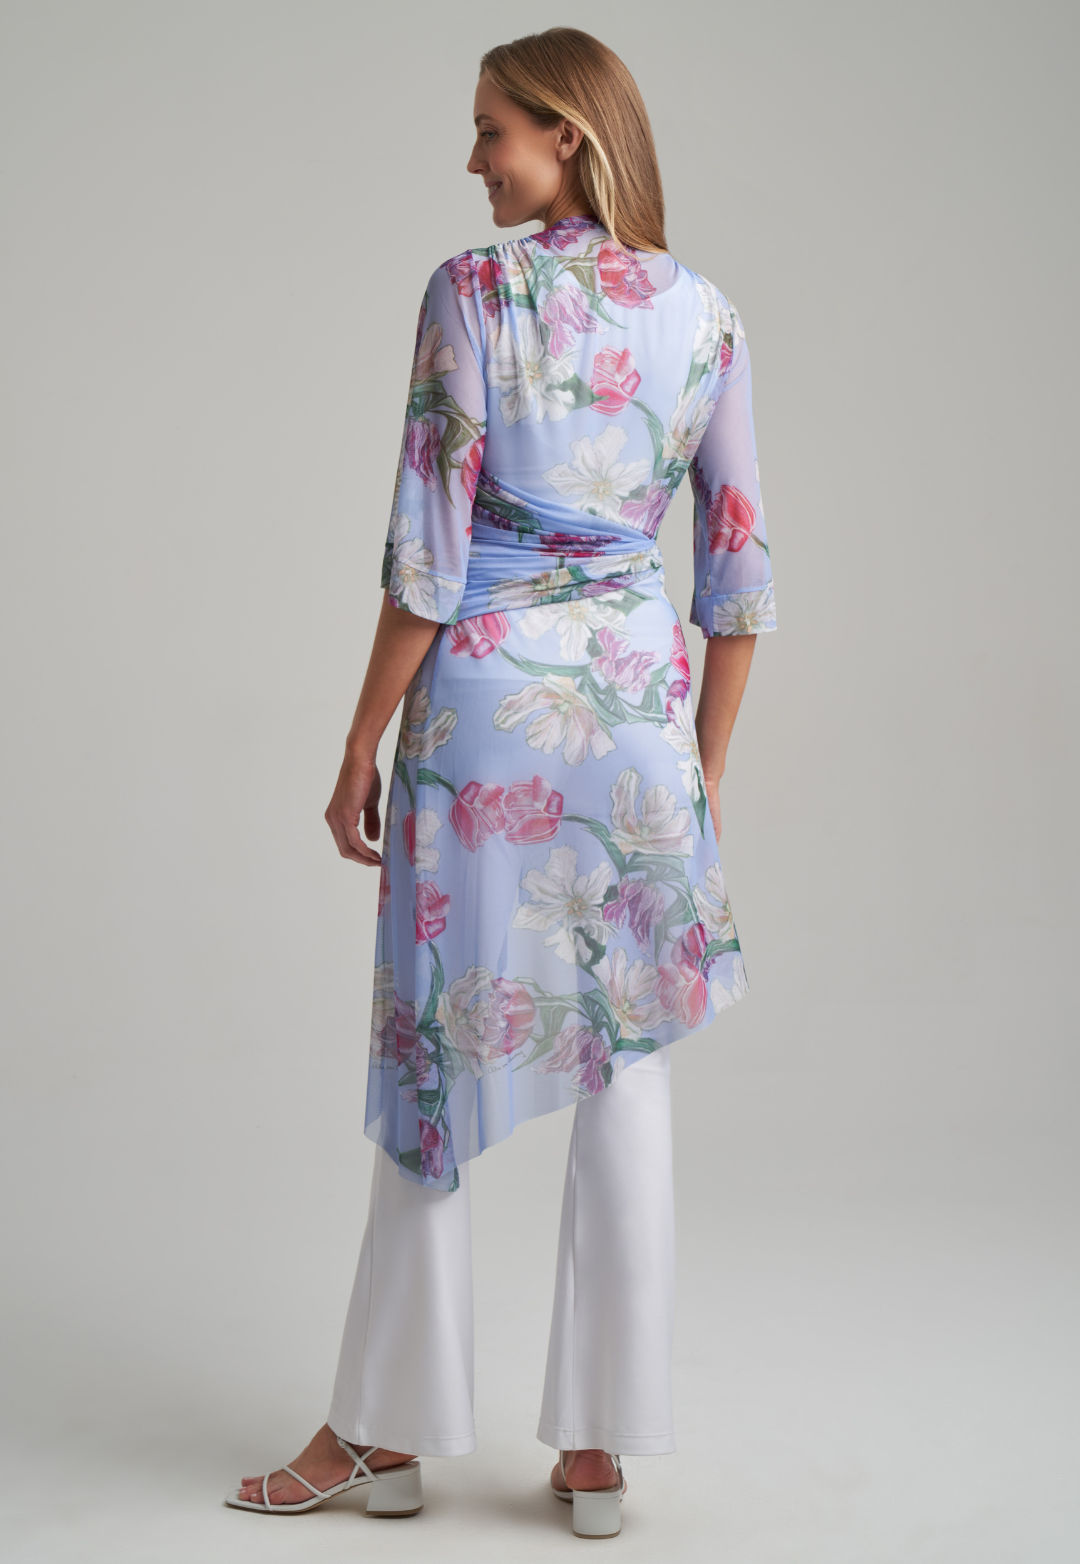 Women wearing mesh tulip printed purple kimono over stretch knit pants and tank top in white by Ala von Auersperg for spring summer 2021